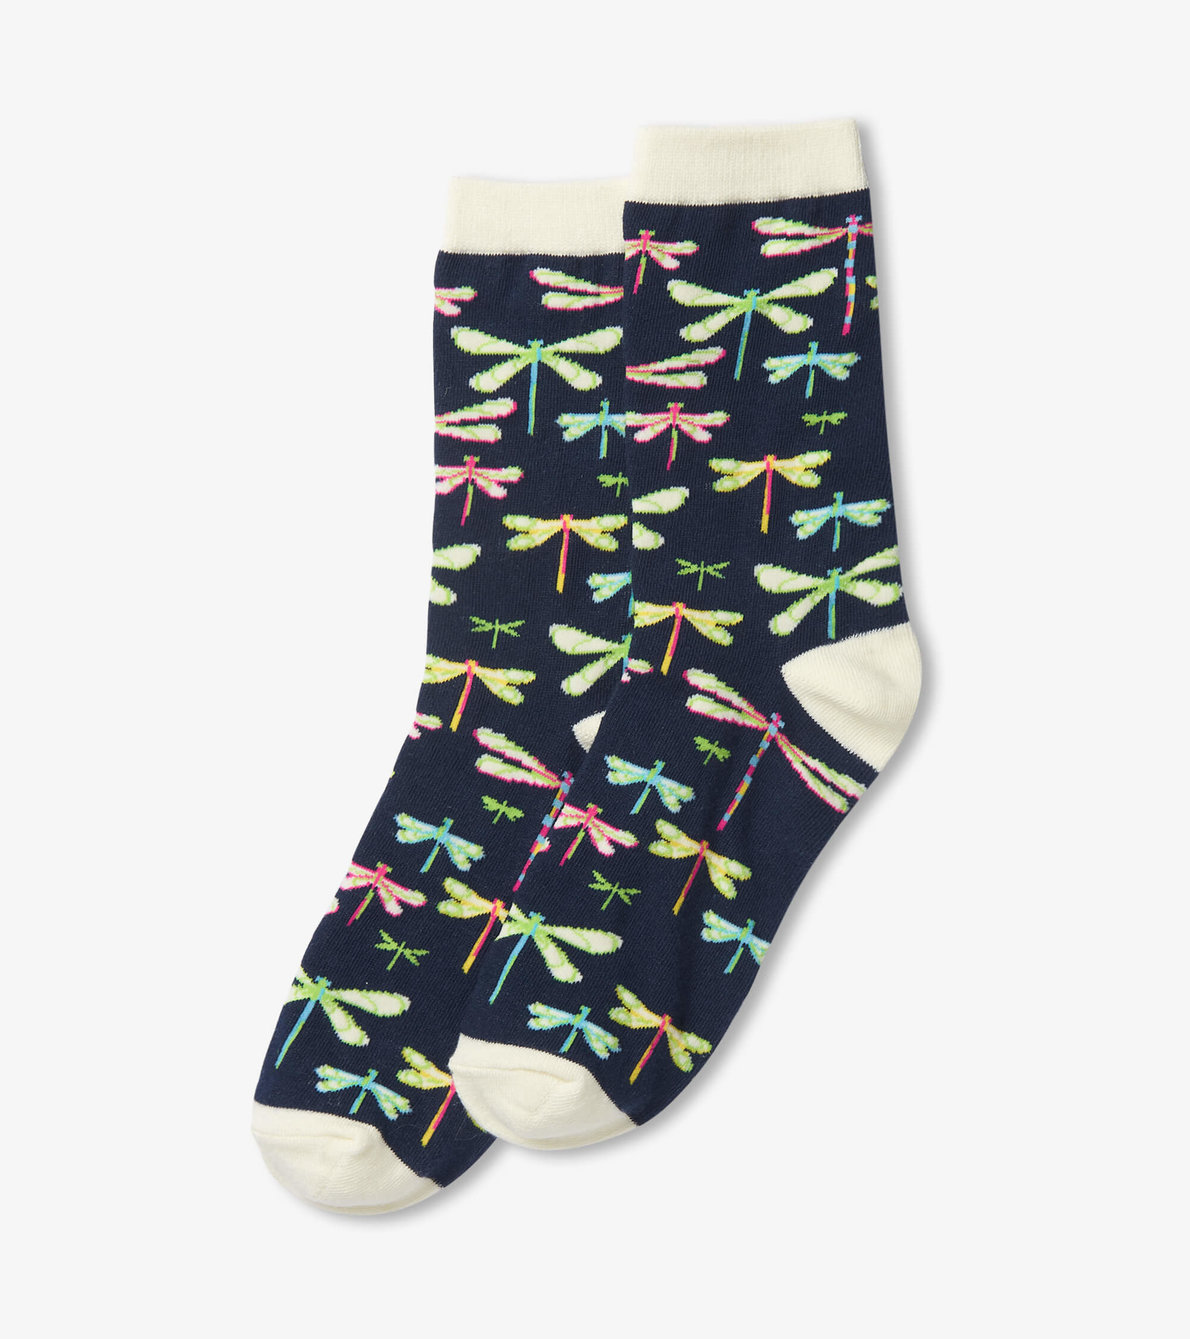 View larger image of Dragonflies Women's Crew Socks